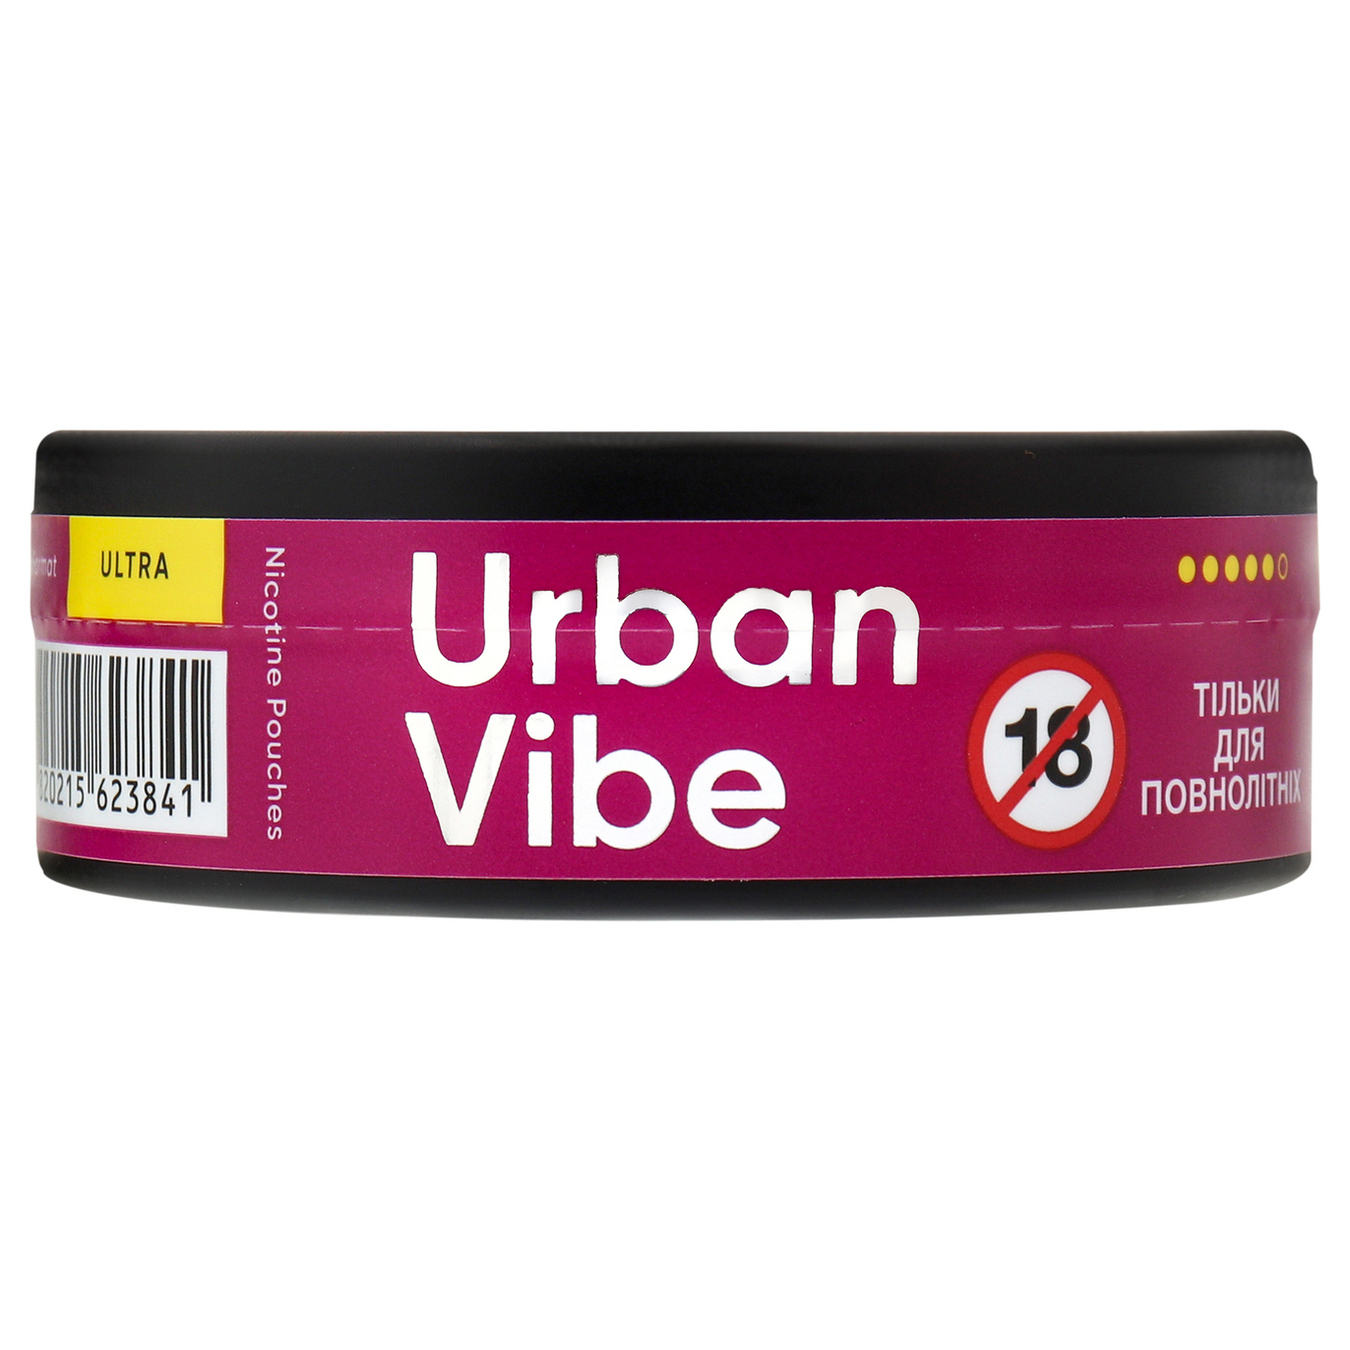 Velo pouches Urban Vibe Ultra pouches tobacco-free nicotine-containing 18*1g/pack